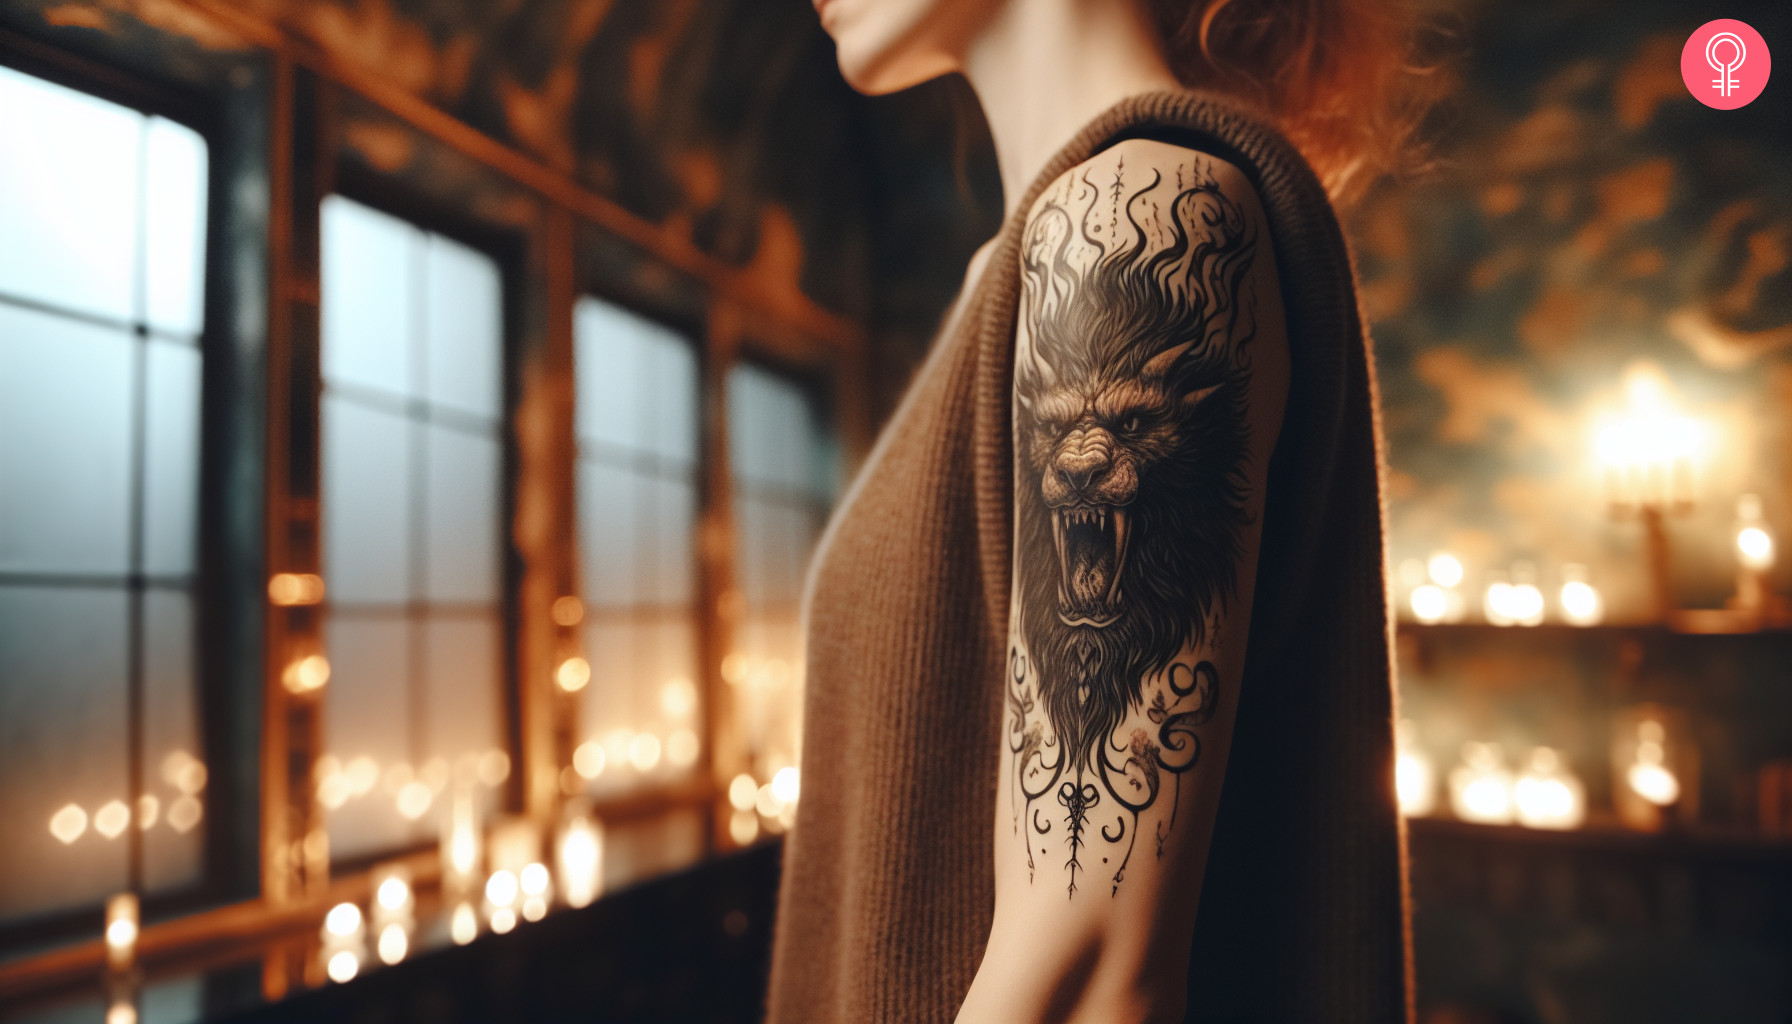 Beast of darkness tattoo on the arm of a woman